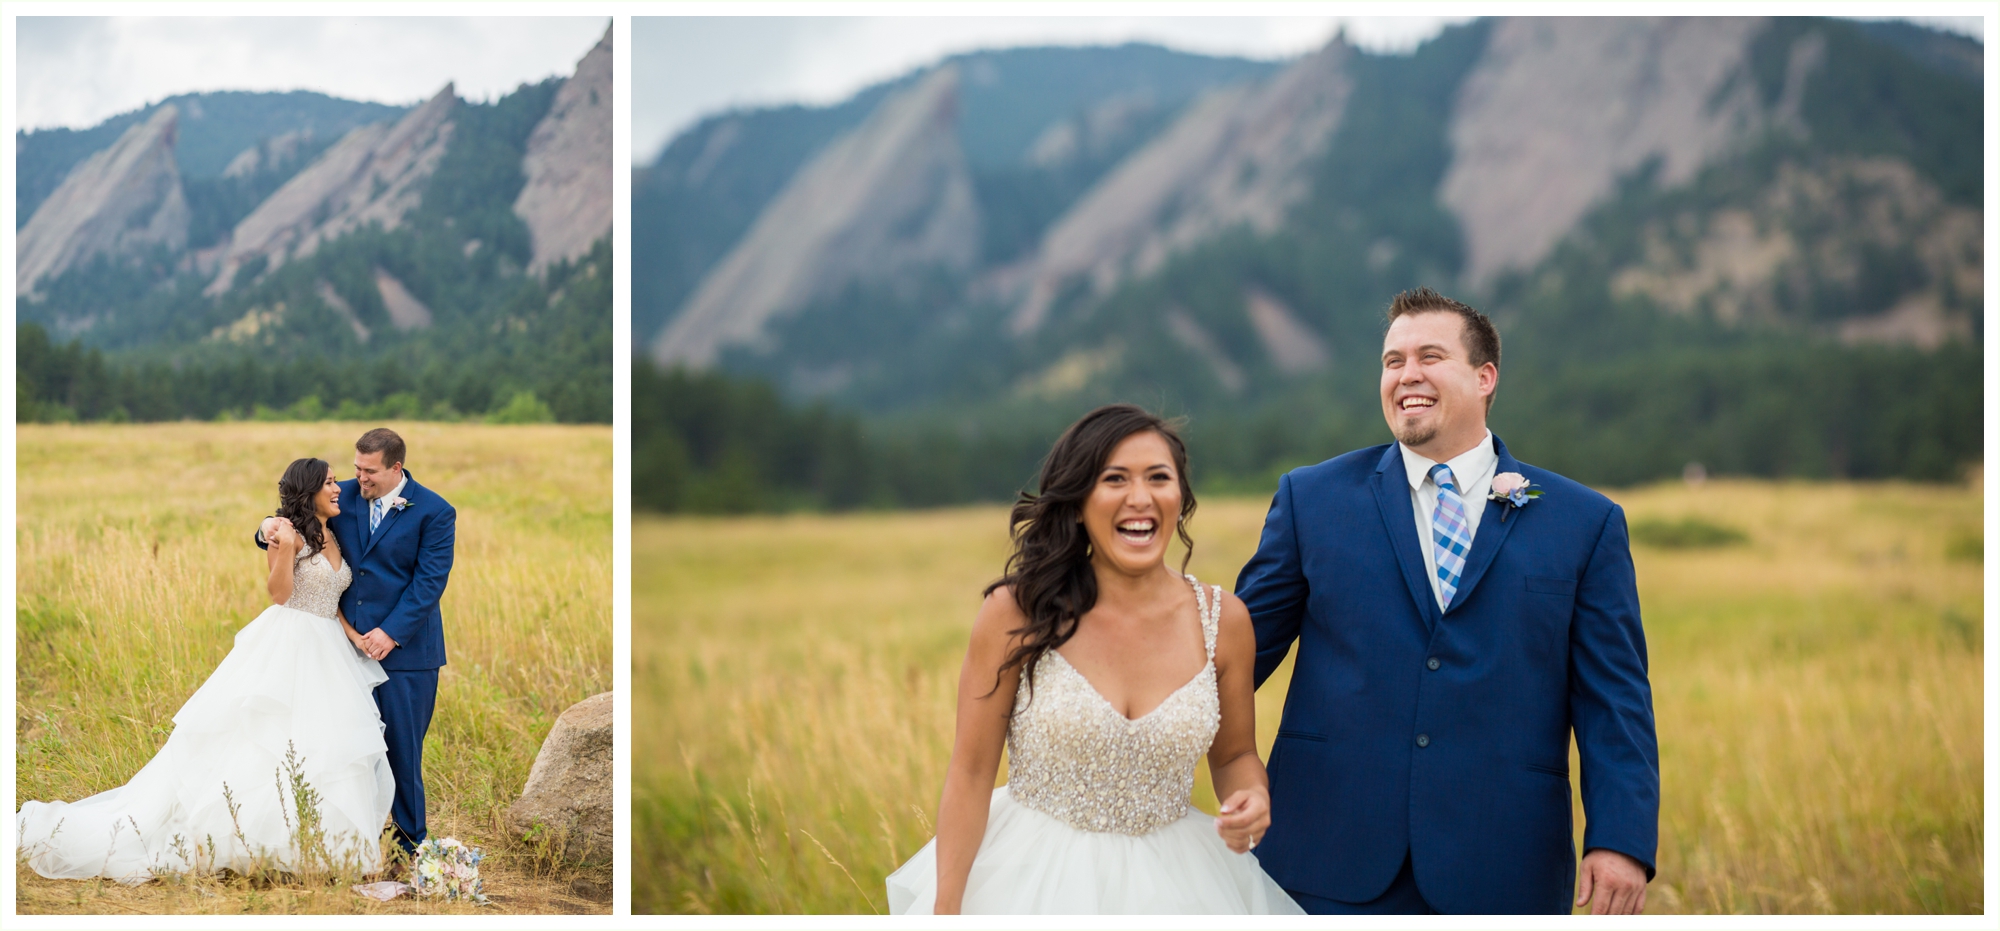 bride and groom portraits in chautauqua park in boulder colorado gorgeous mountains and candid laughing